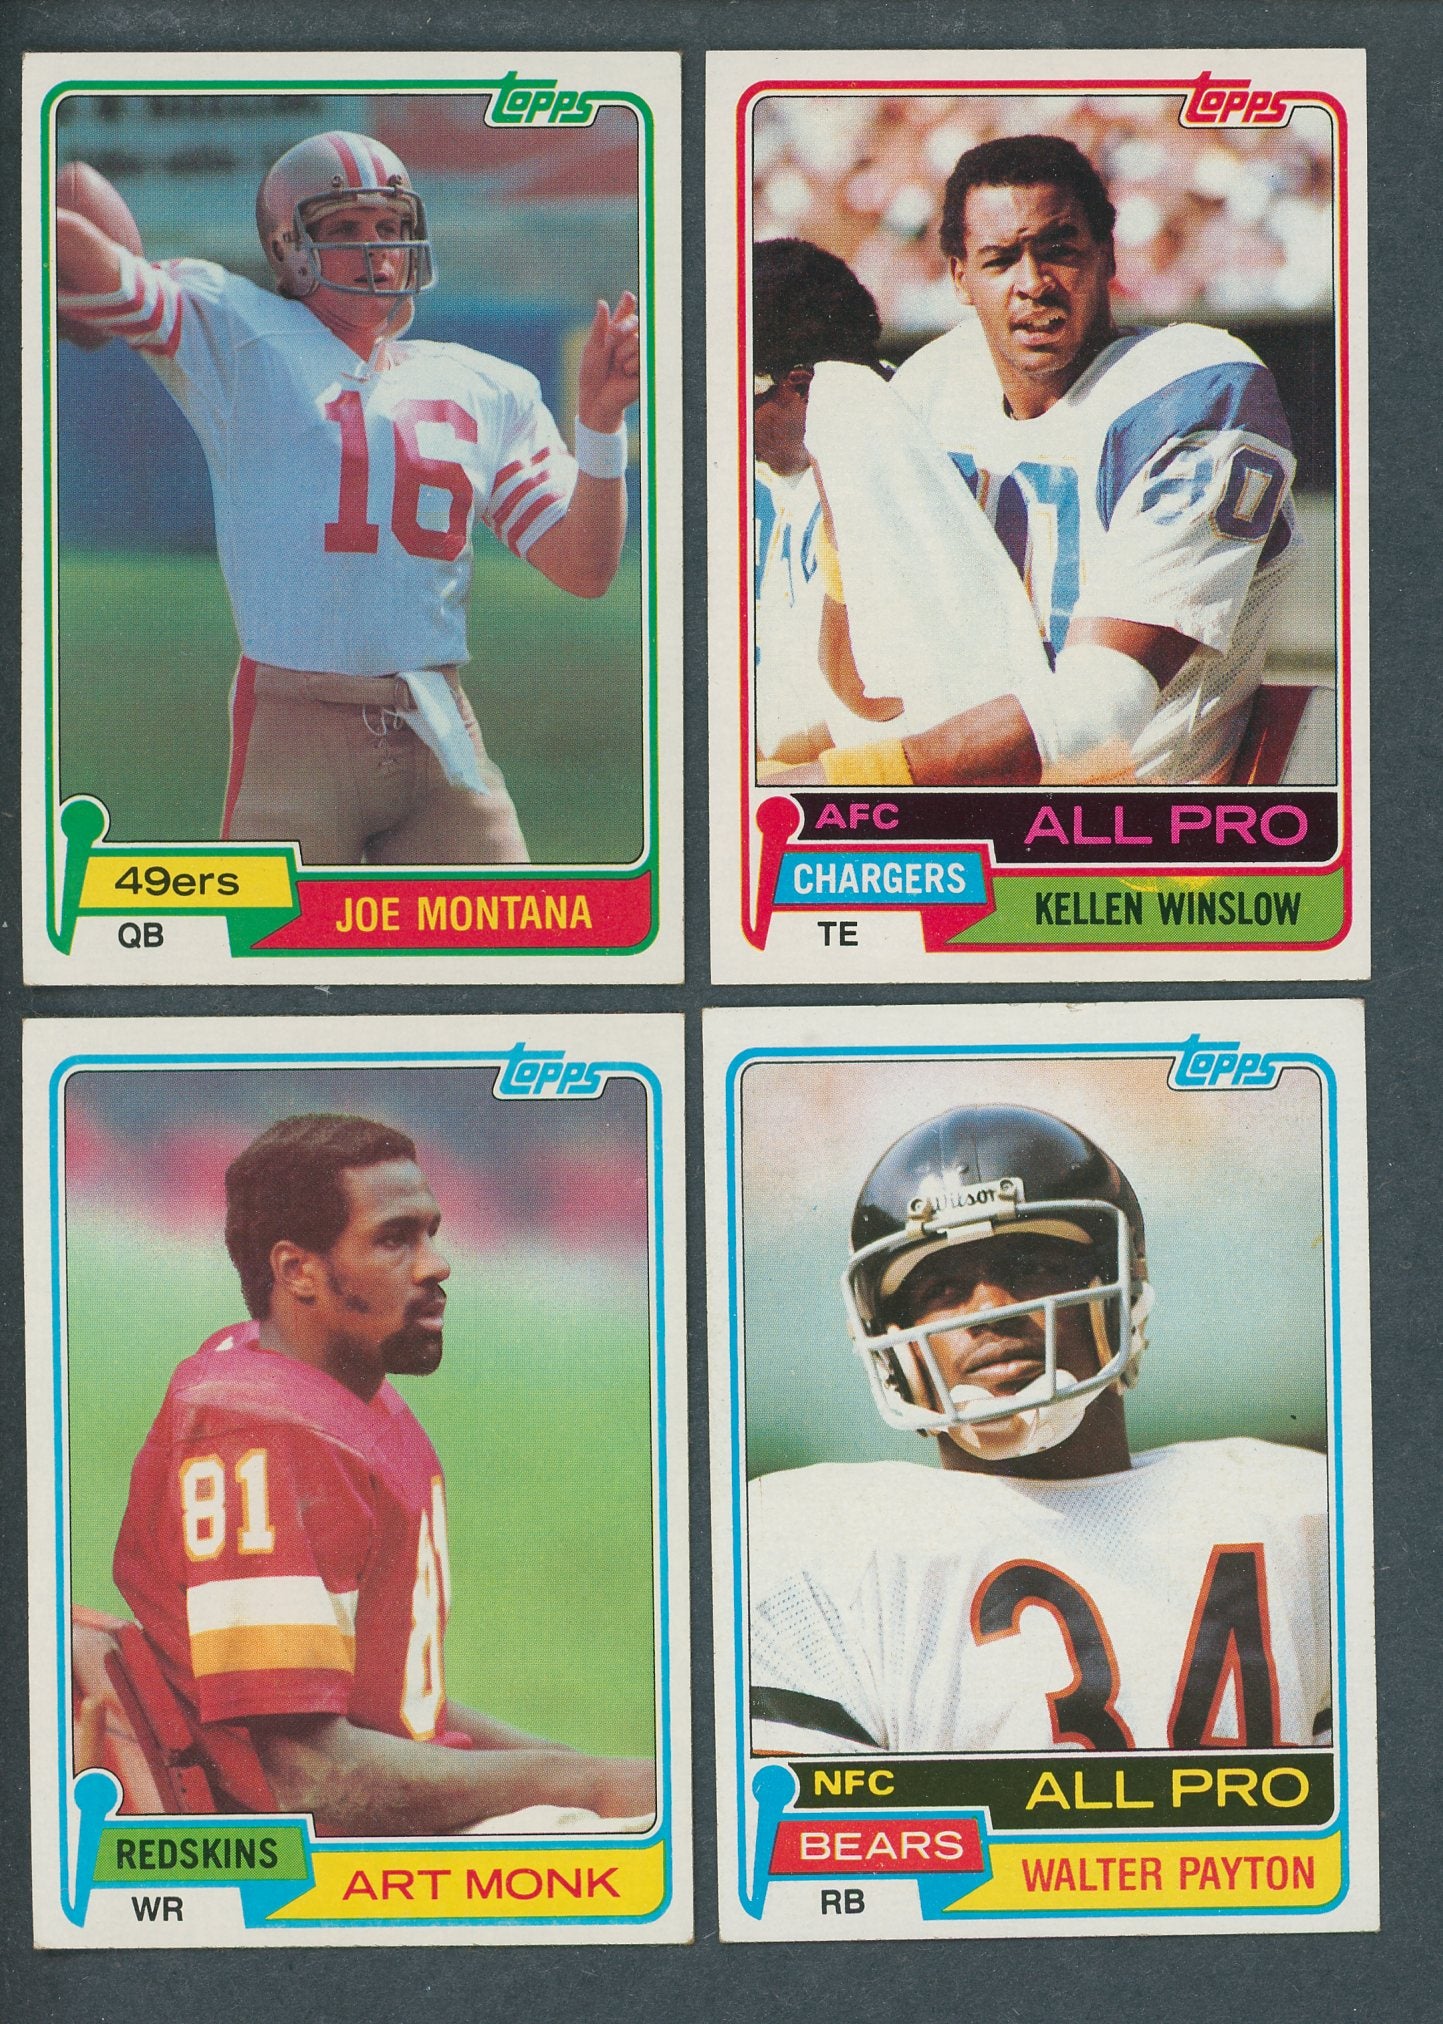 1981 Topps Football Complete Set EX/MT NM (528) (23-90)